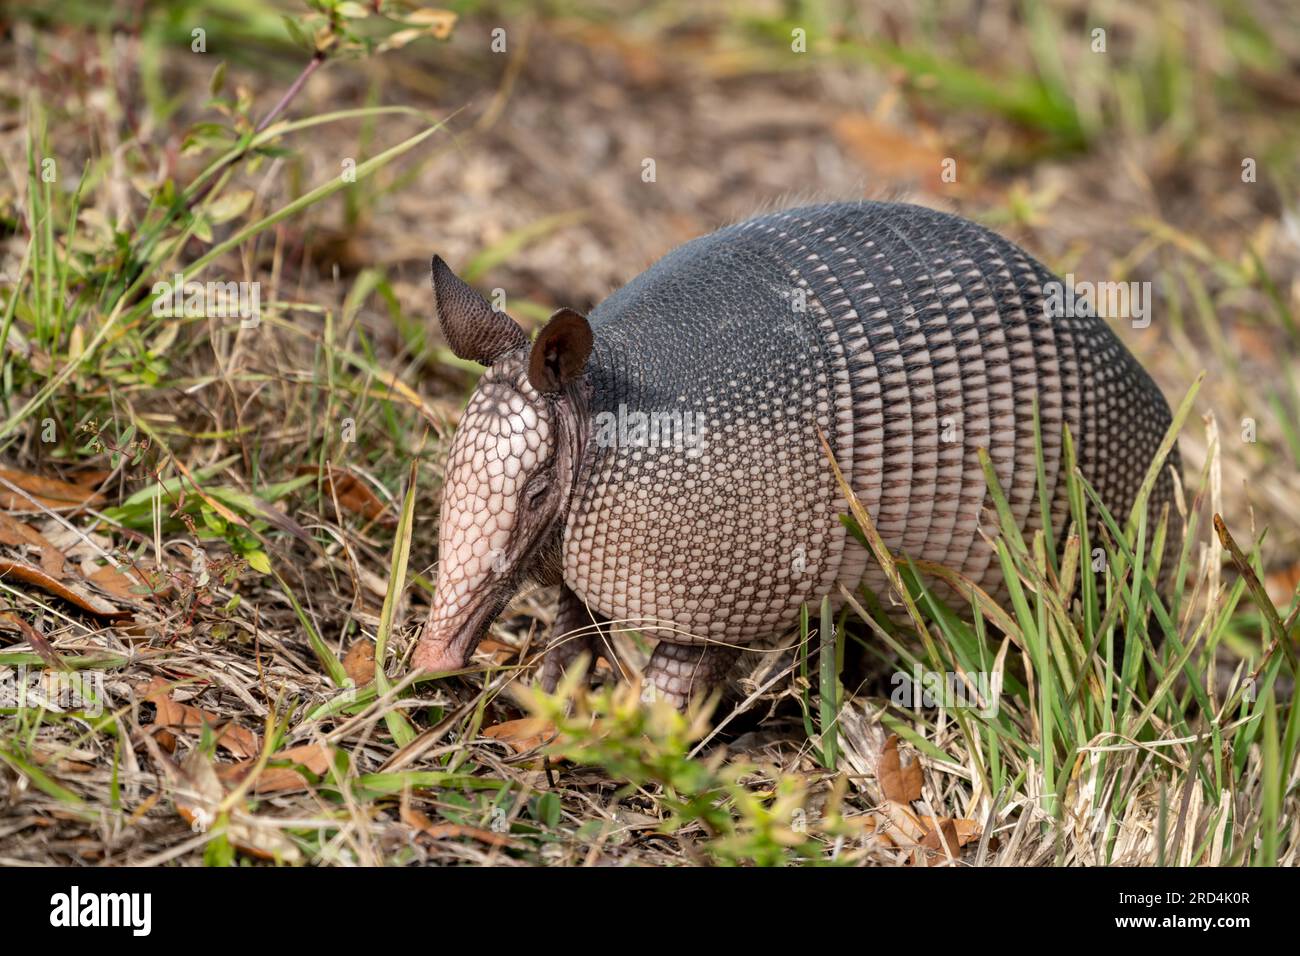 Armadillo looks for food in the grass, in Merritt Island Florida Stock Photo